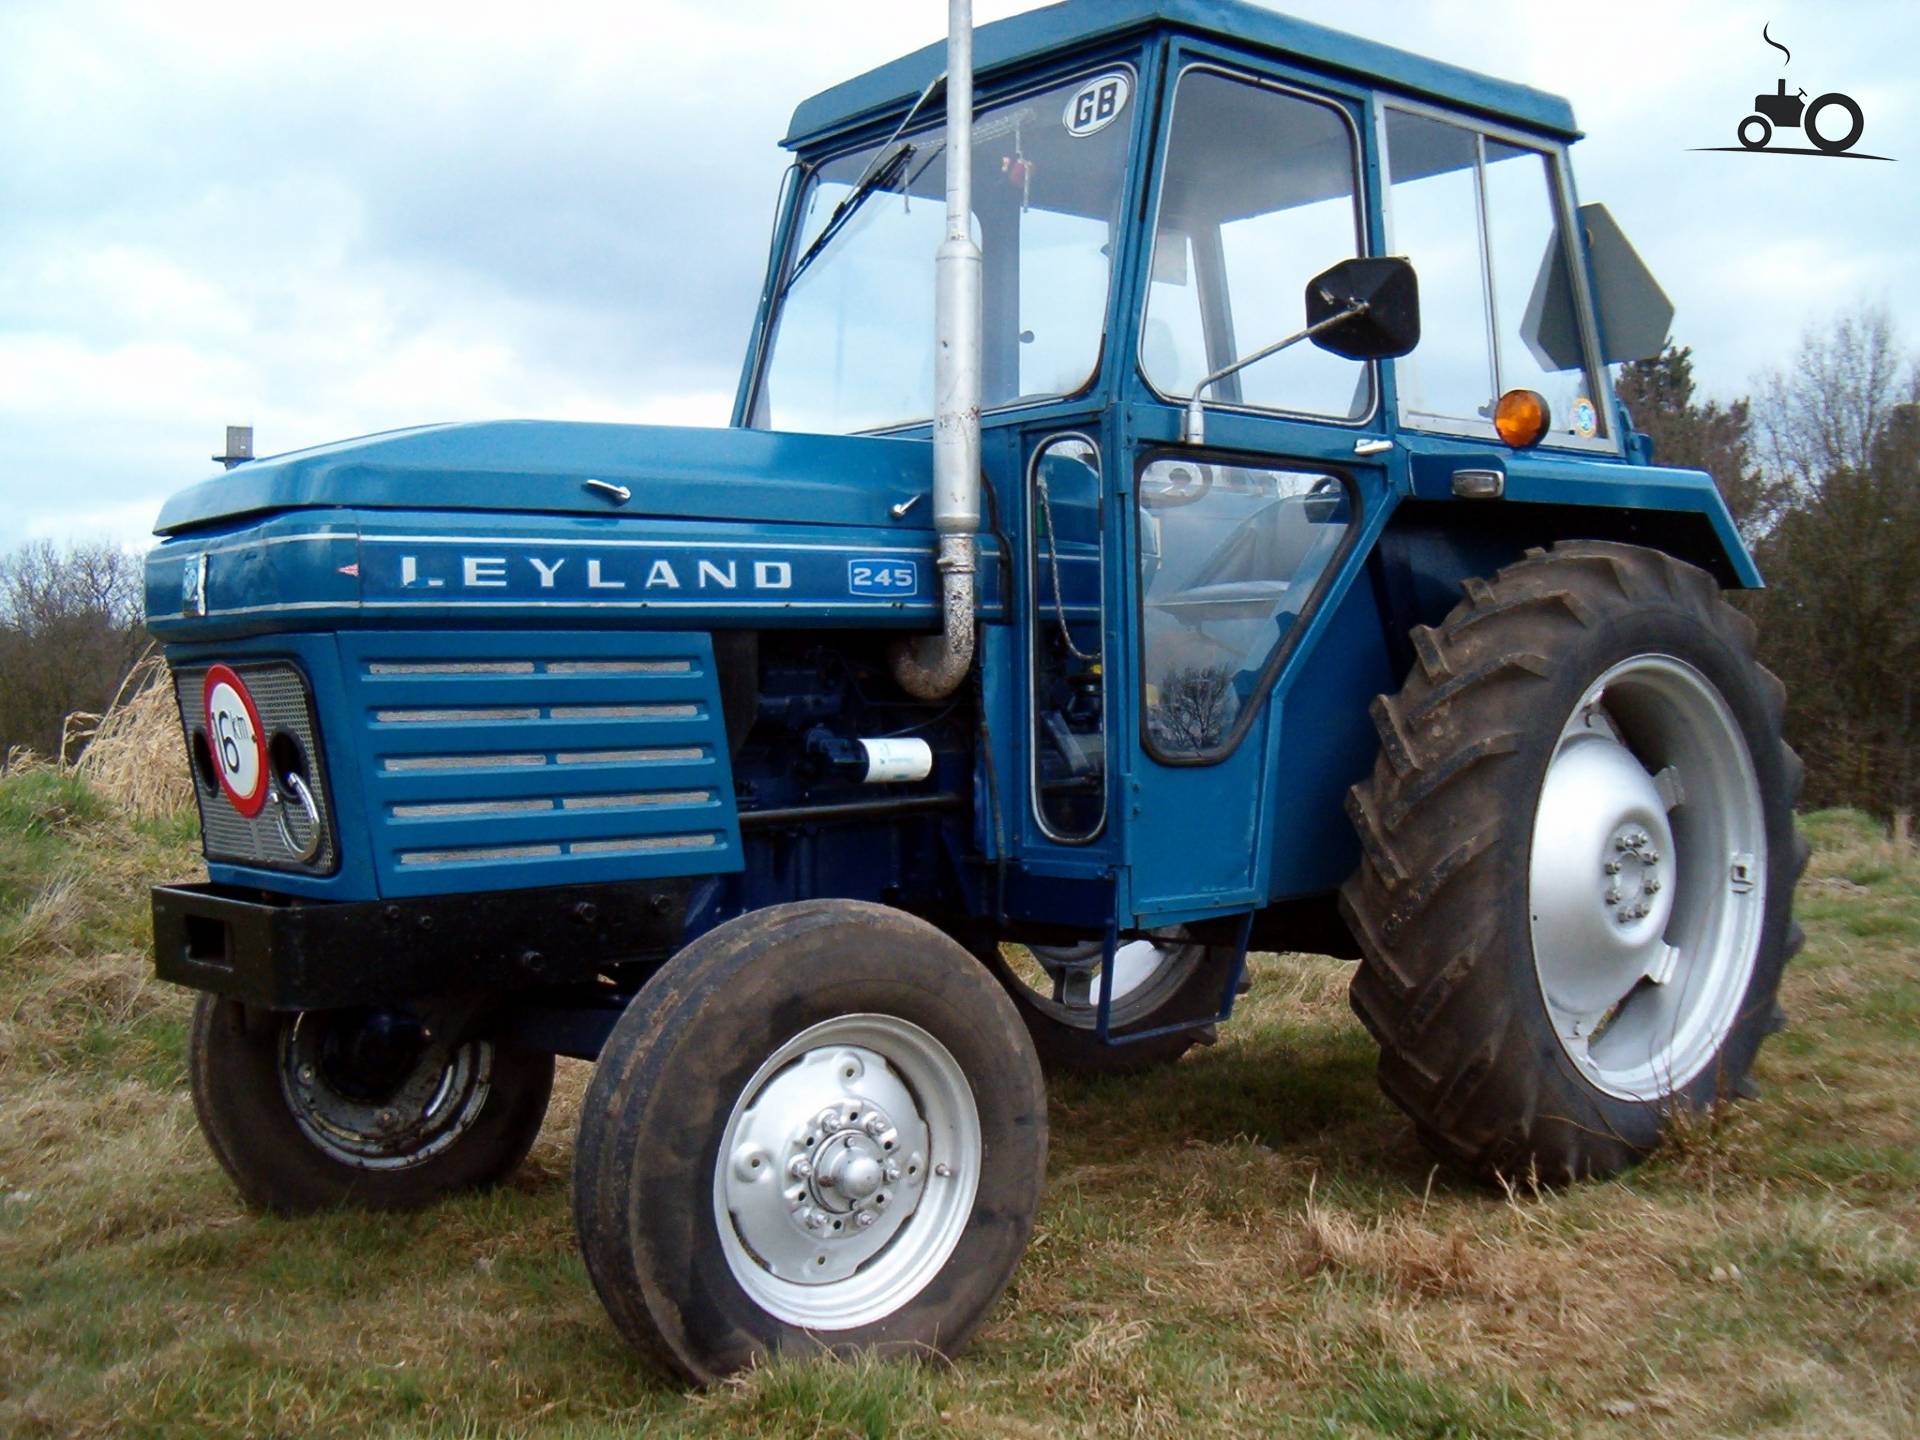 Leyland 245 | Picture made by